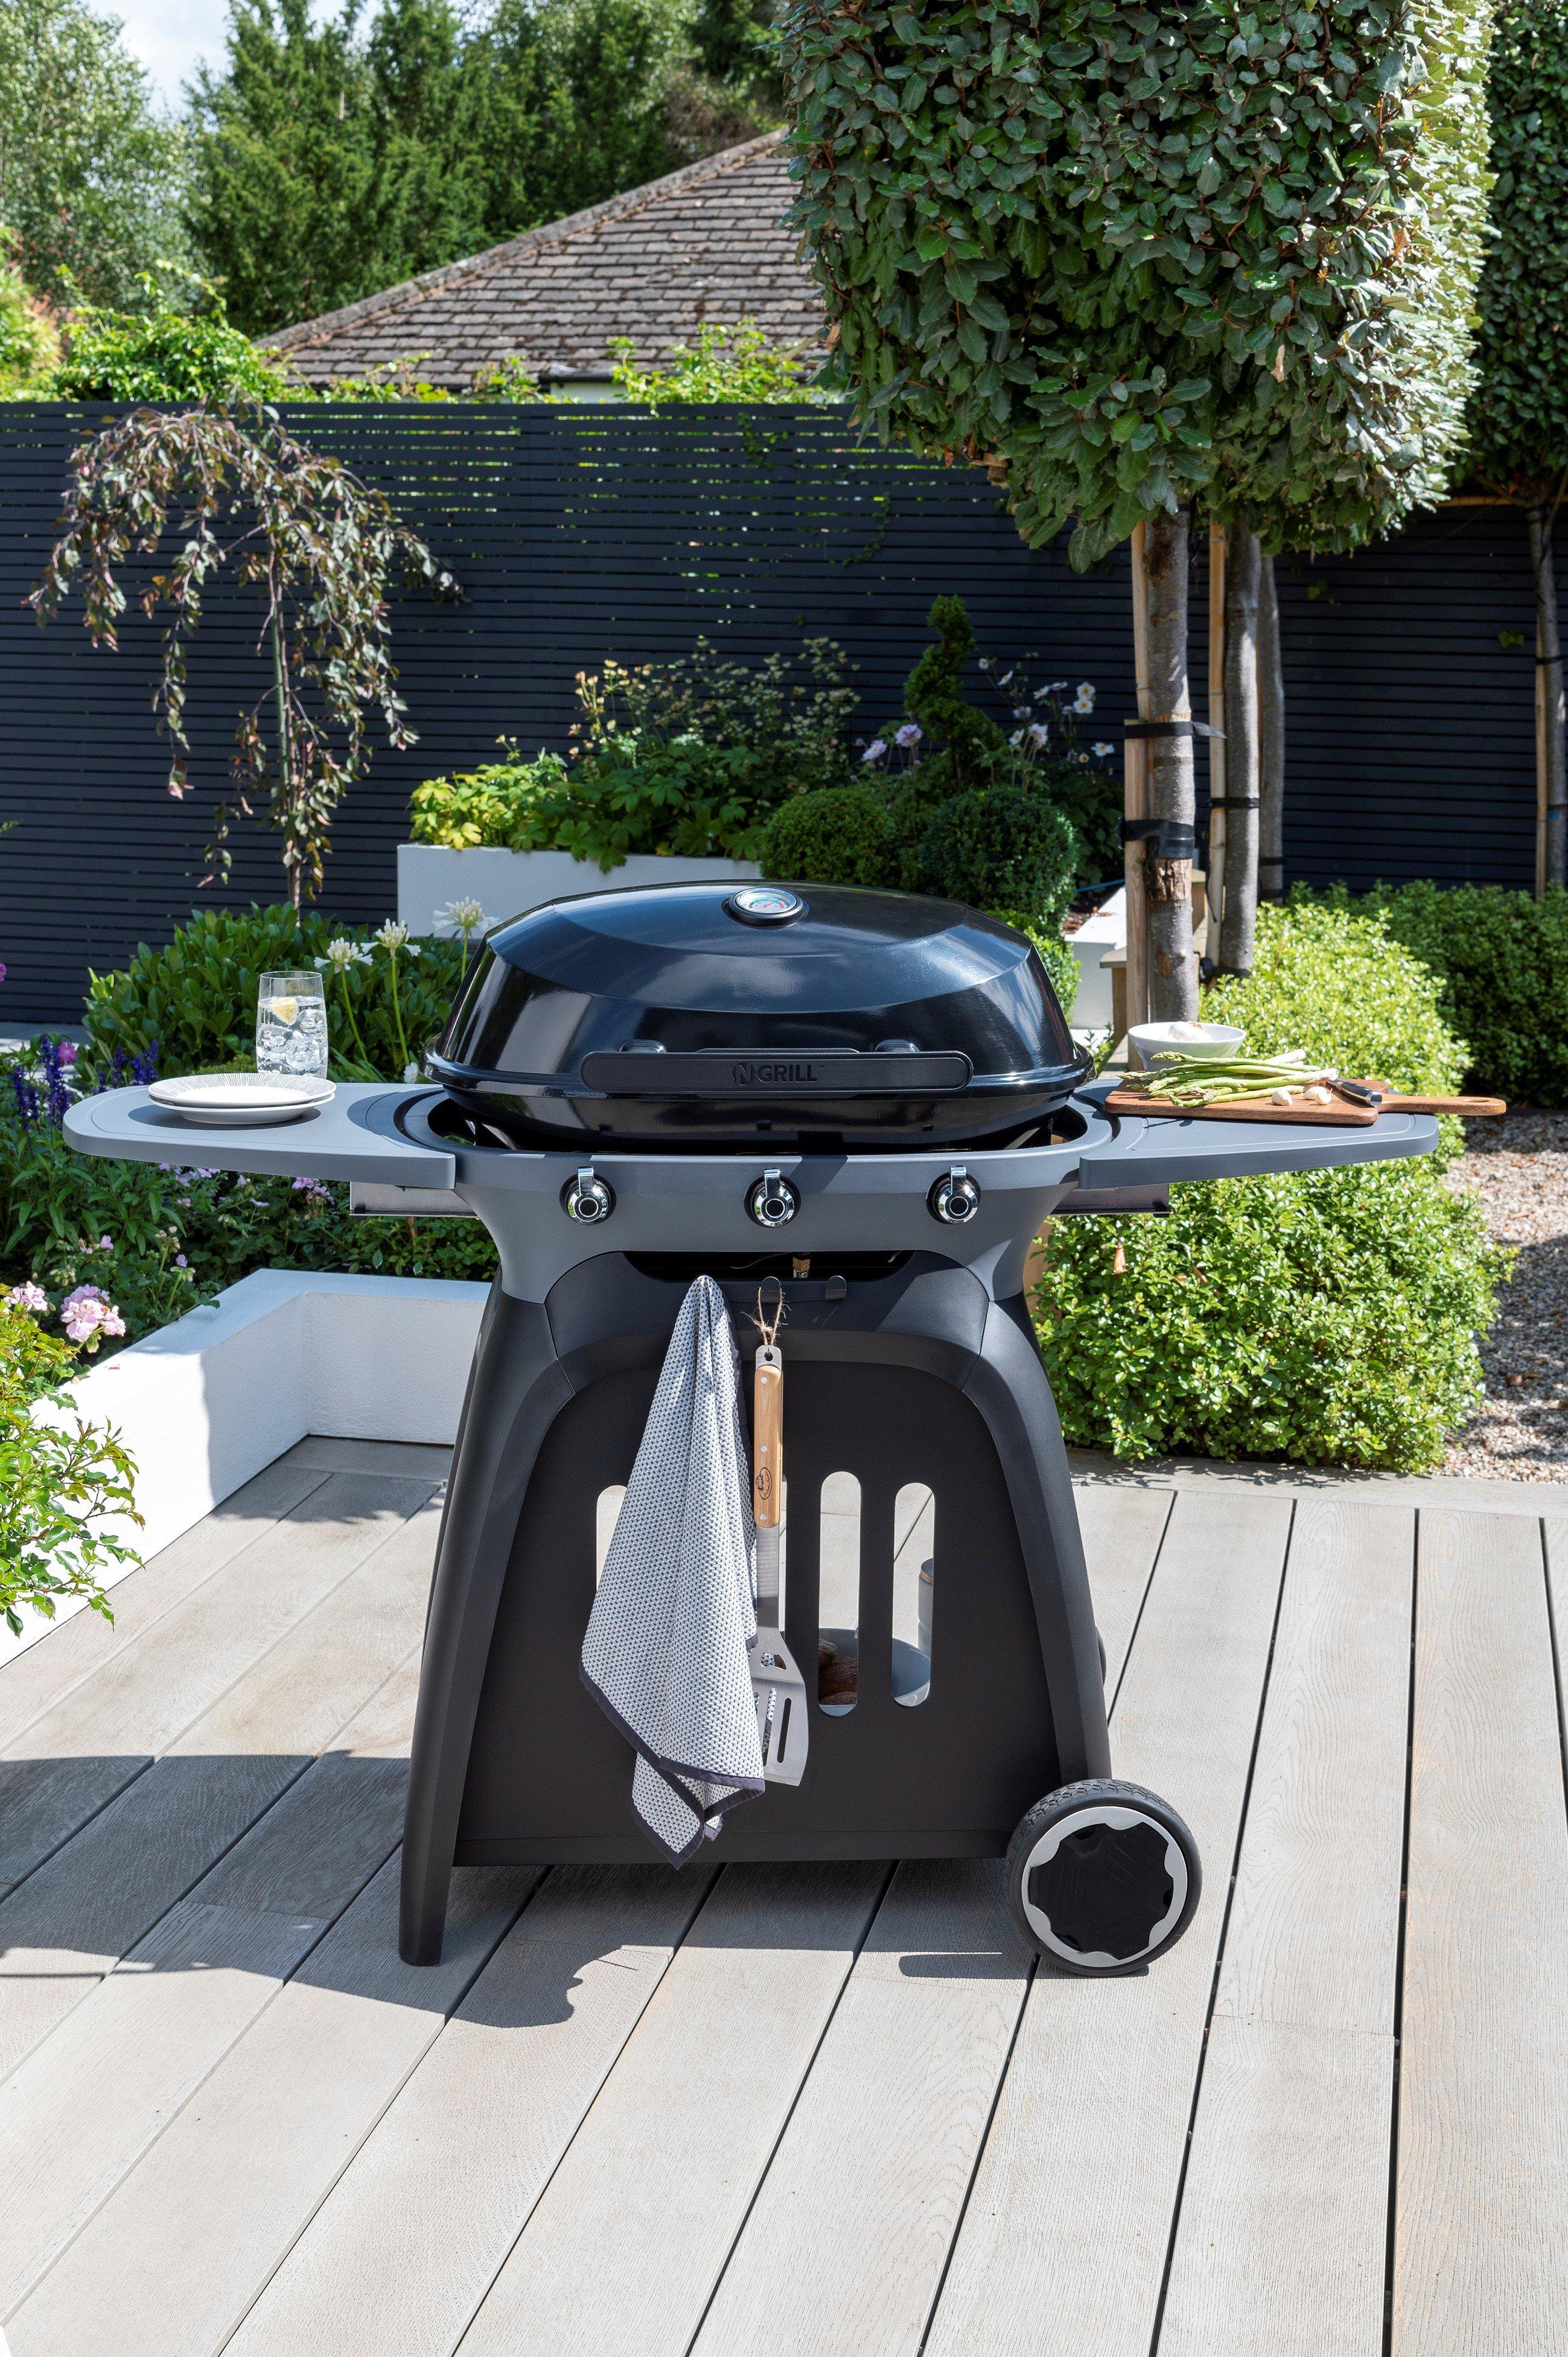 N-Grill 300 Gas Barbeque